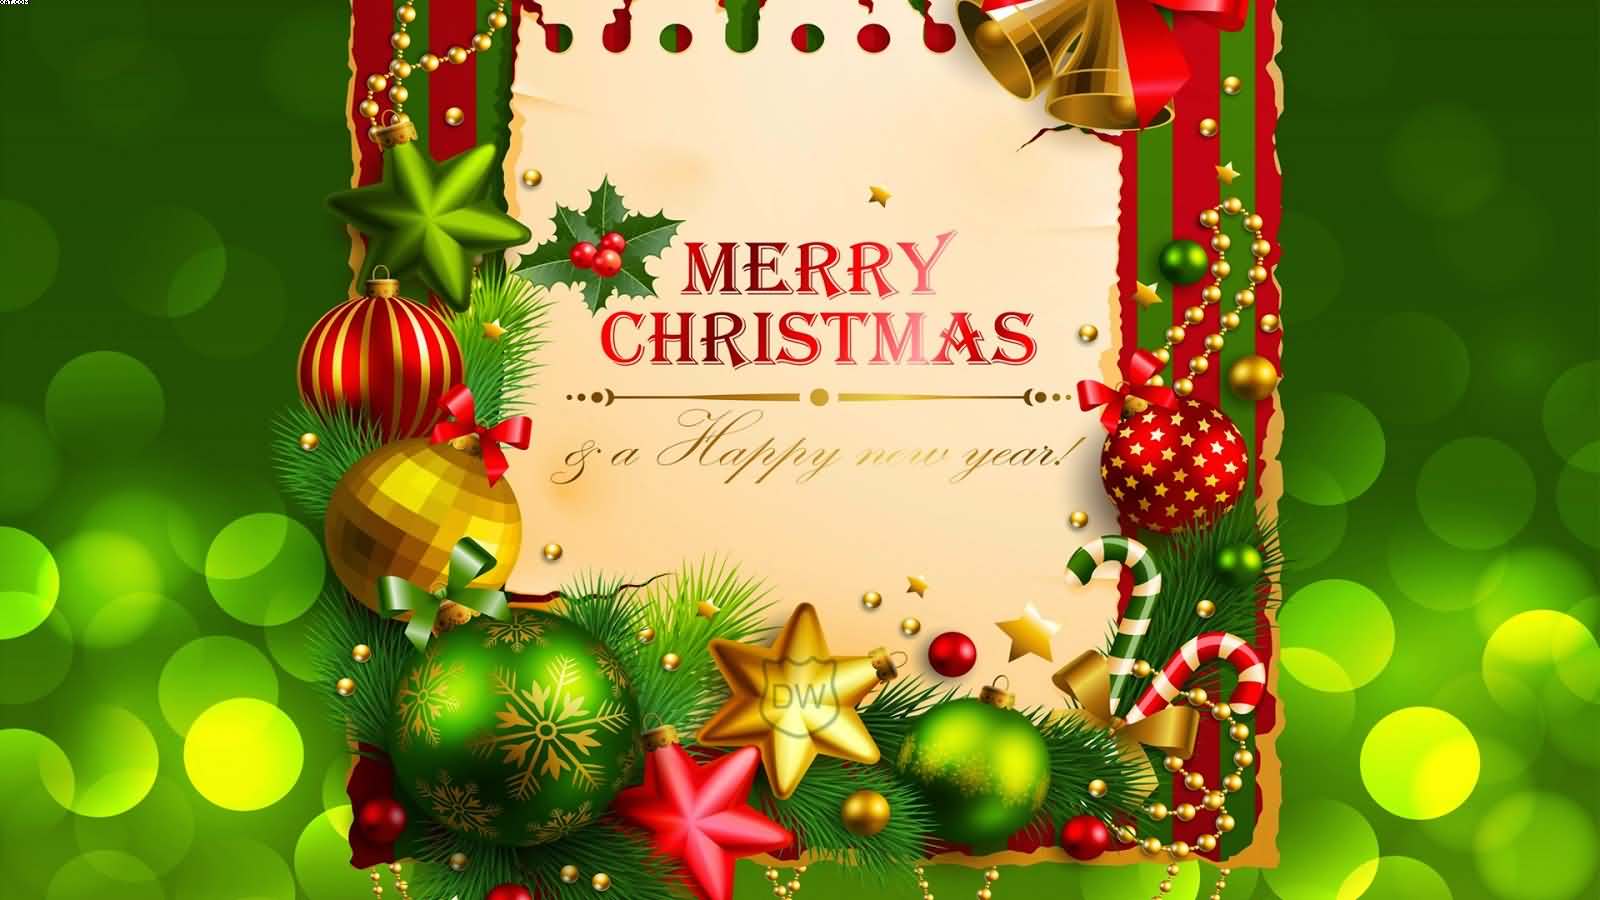 Merry Christmas and Happy New Year wishes greeting card on green background